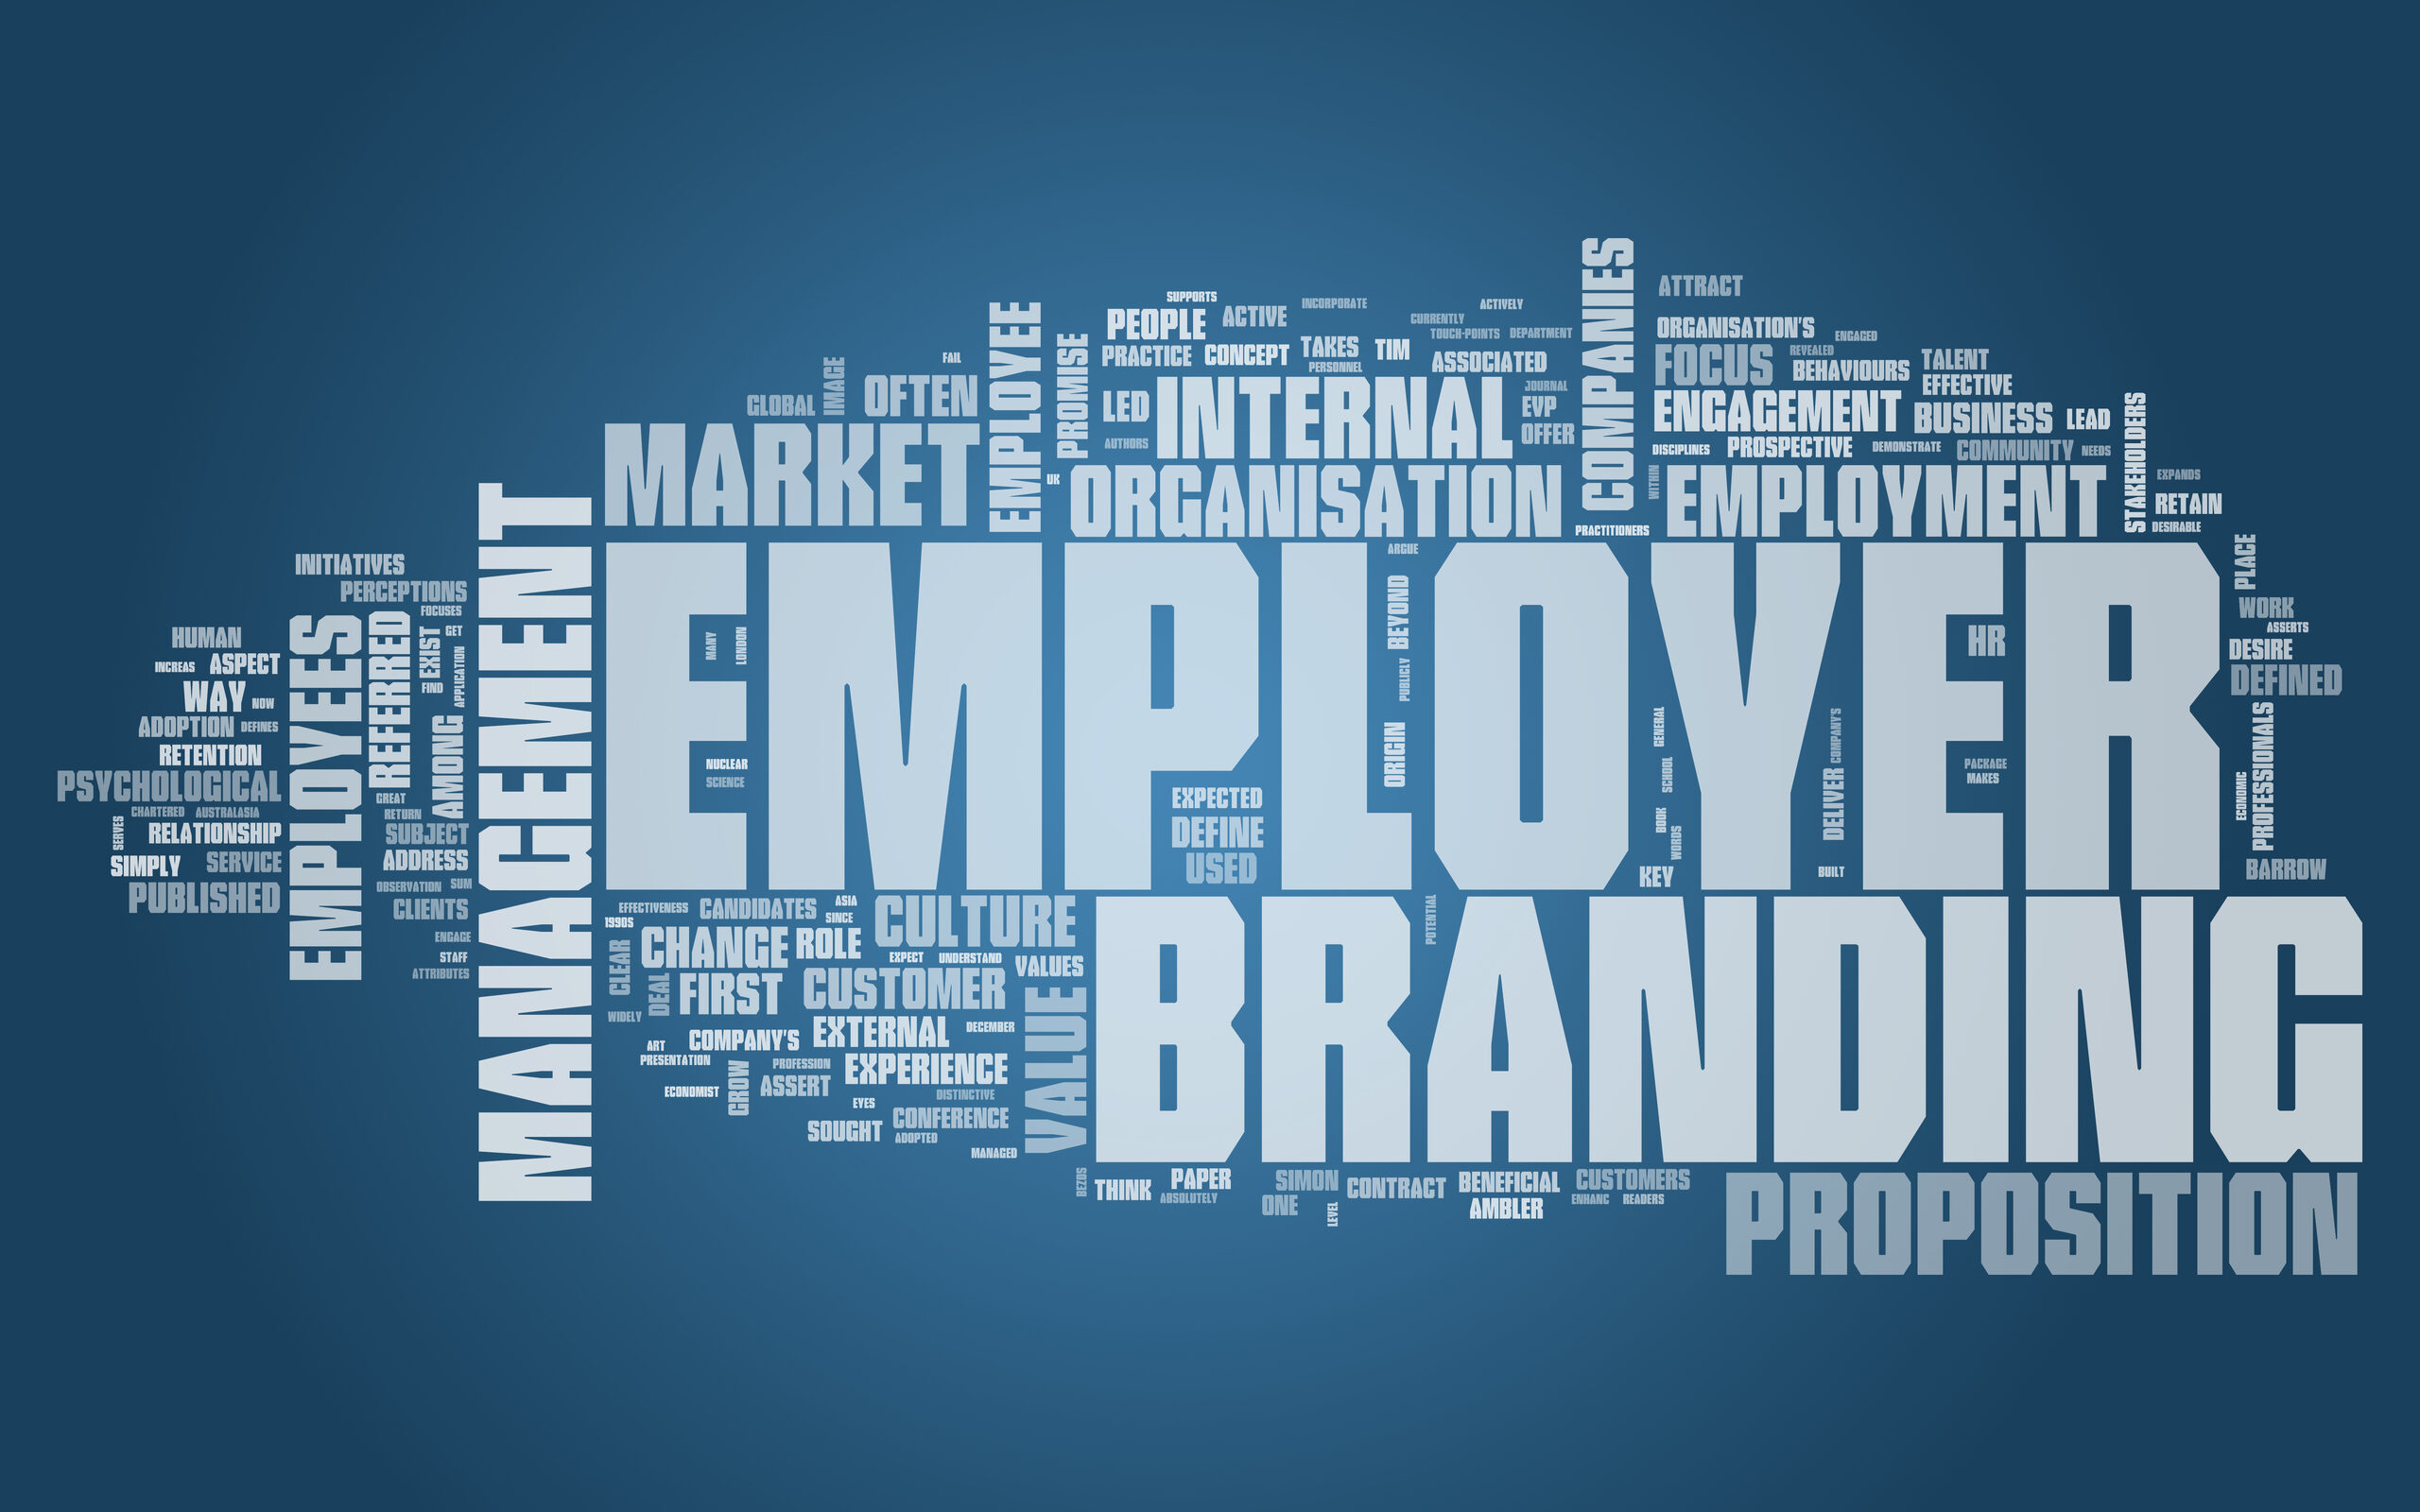 conceptualizing and researching employer branding